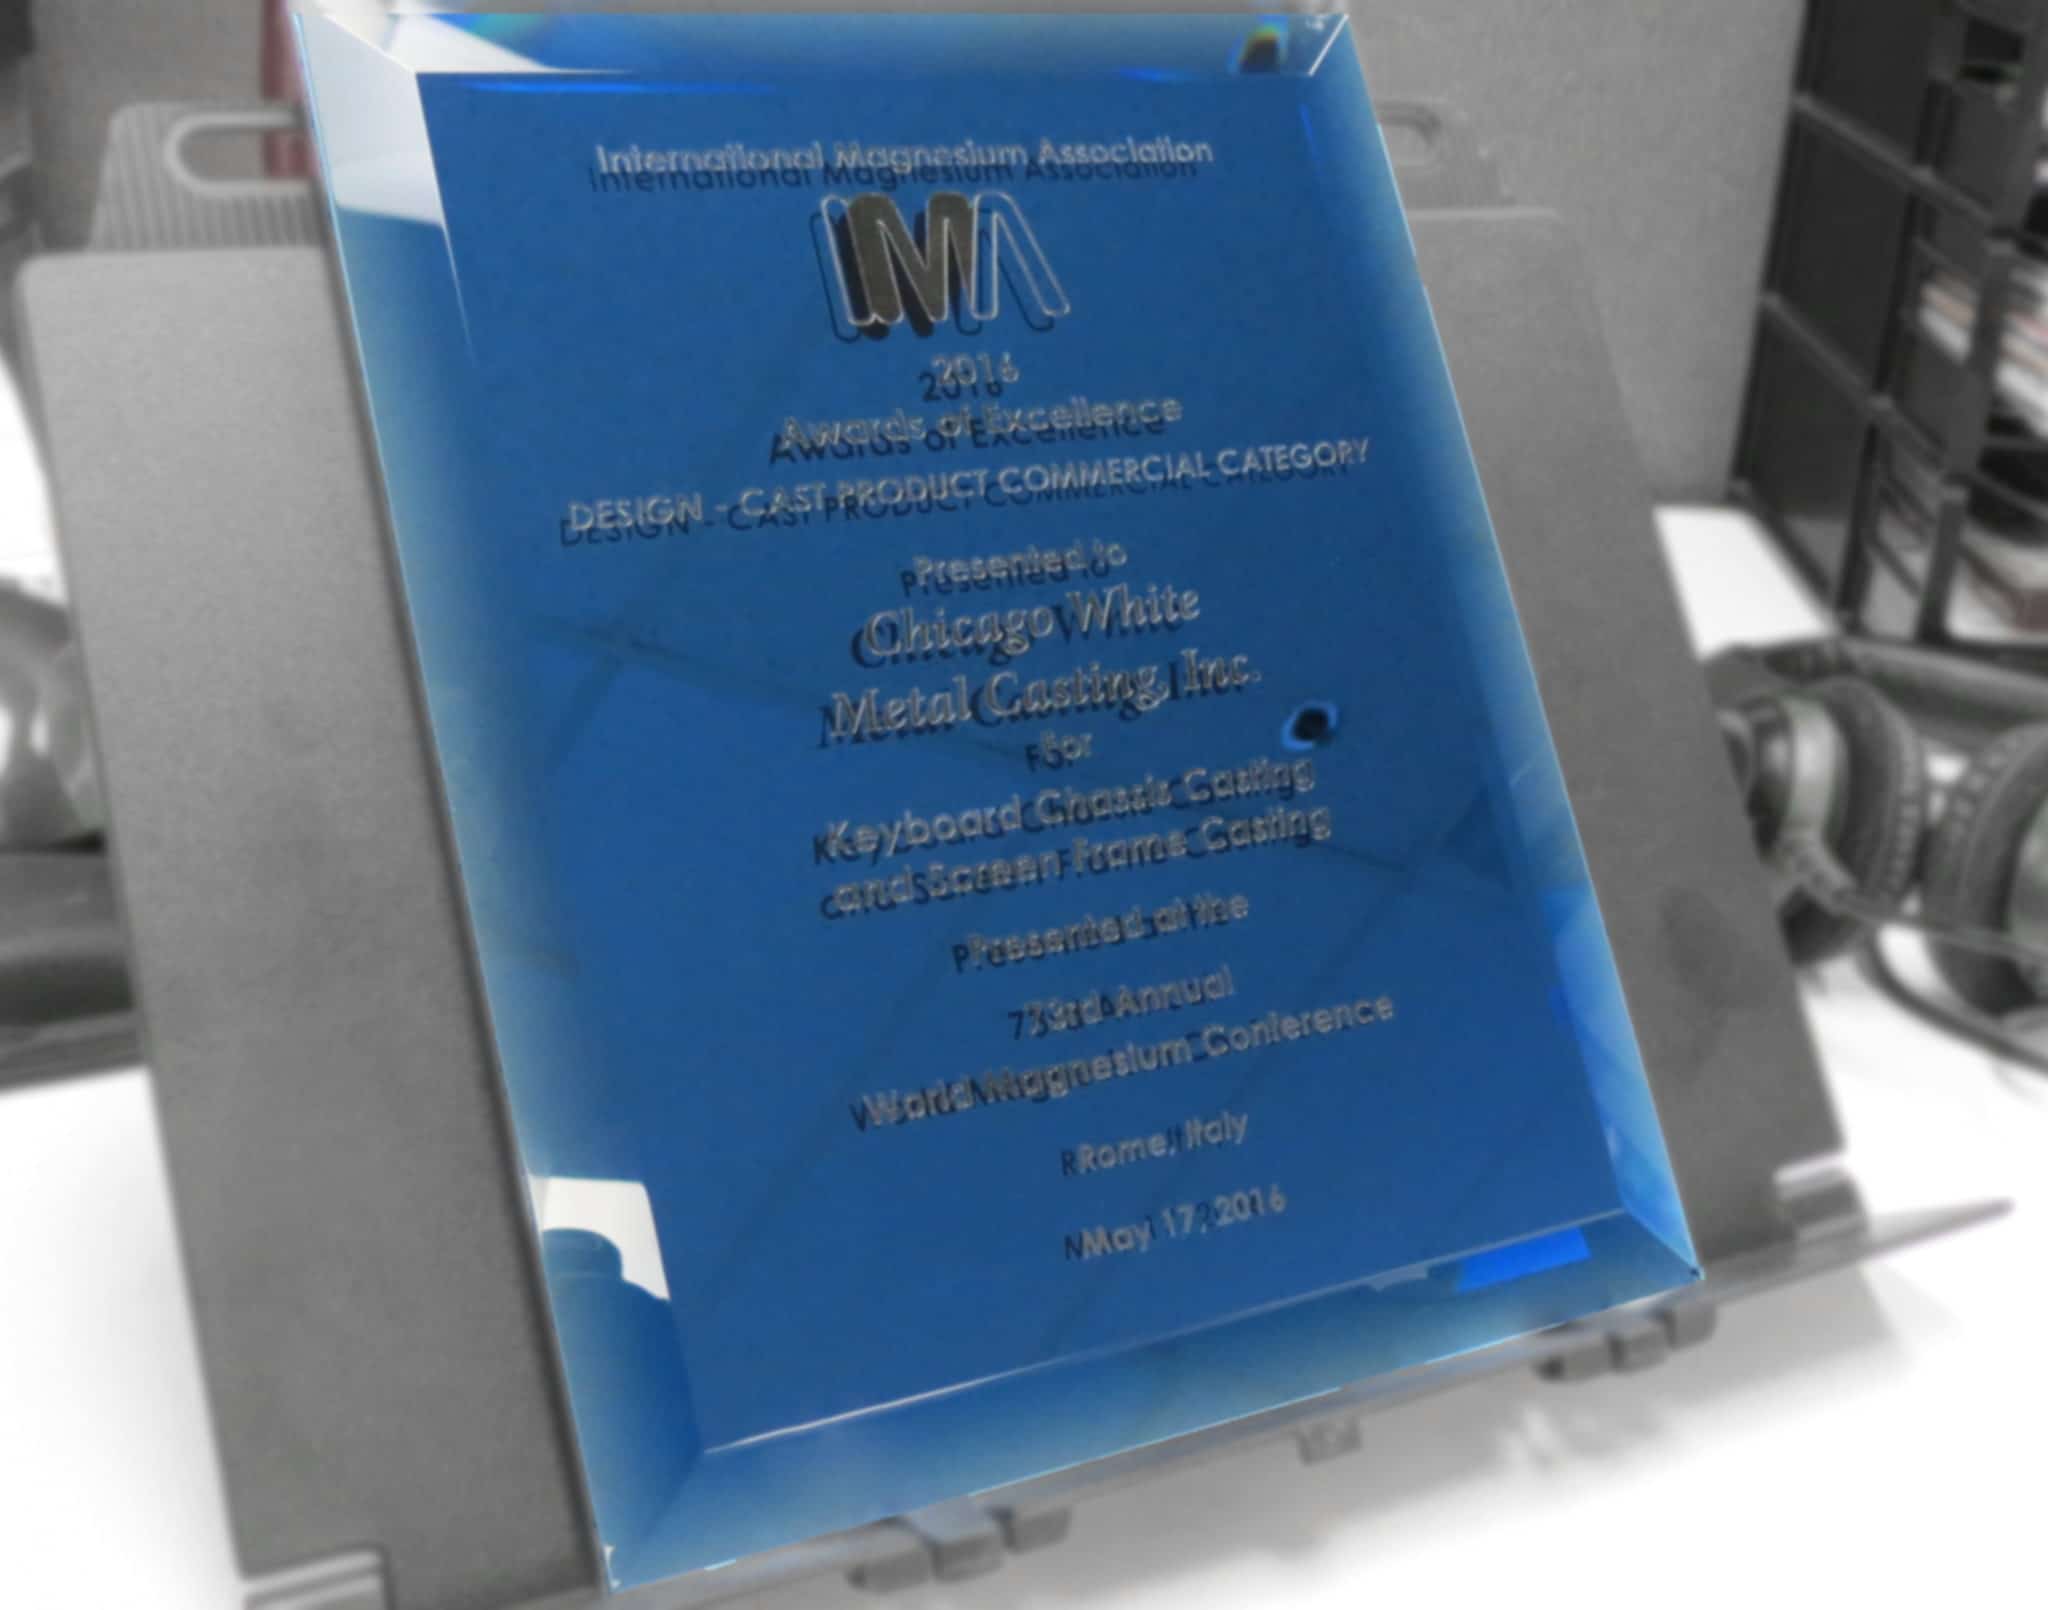 The Verdict Is In… CWM and Stenograph Win the IMA Award for Die Cast